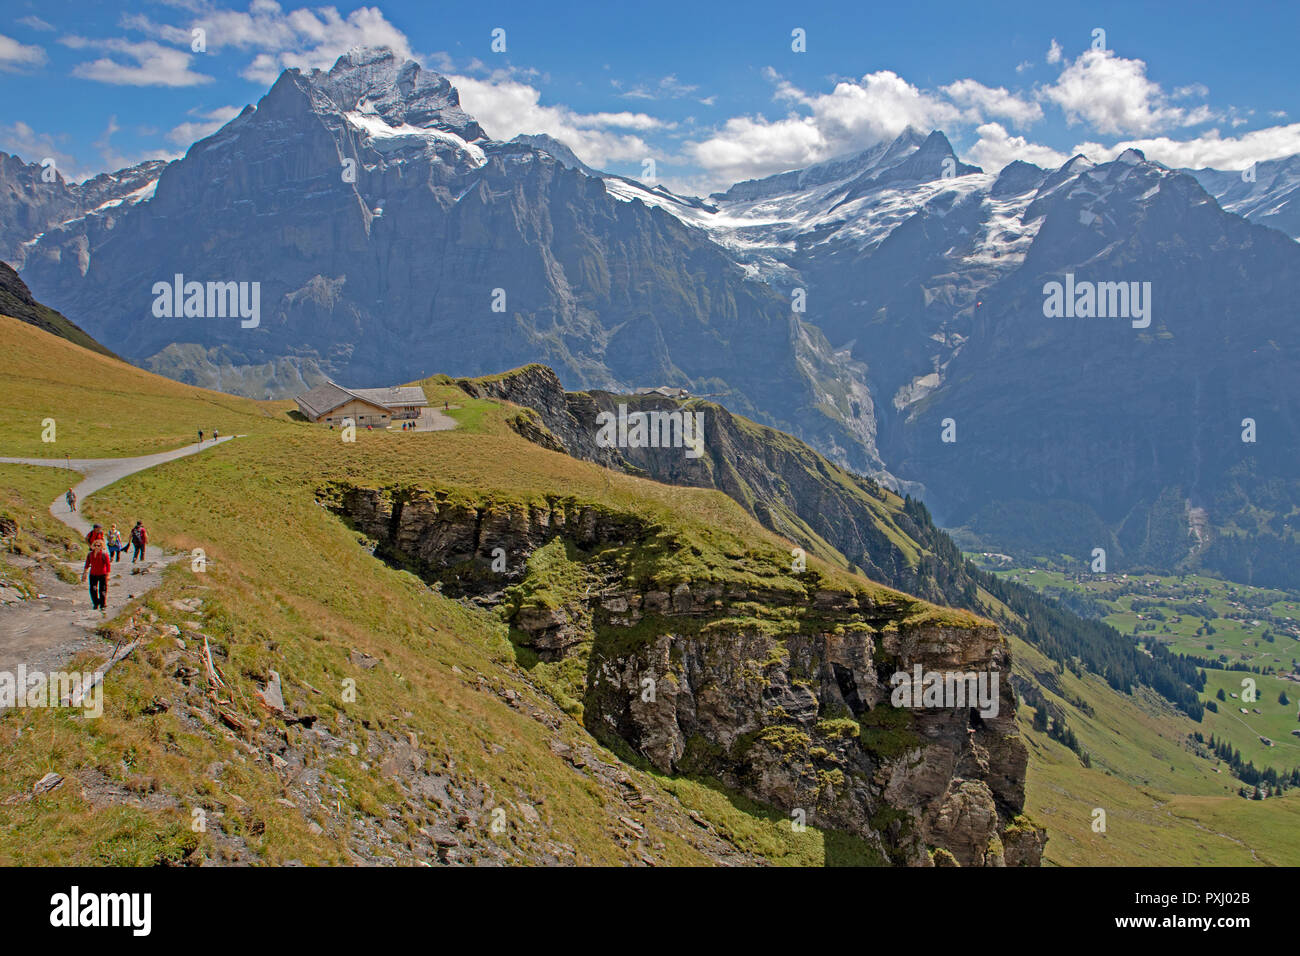 Hikers on the trail to Bachalpsee above Grindelwald Stock Photo